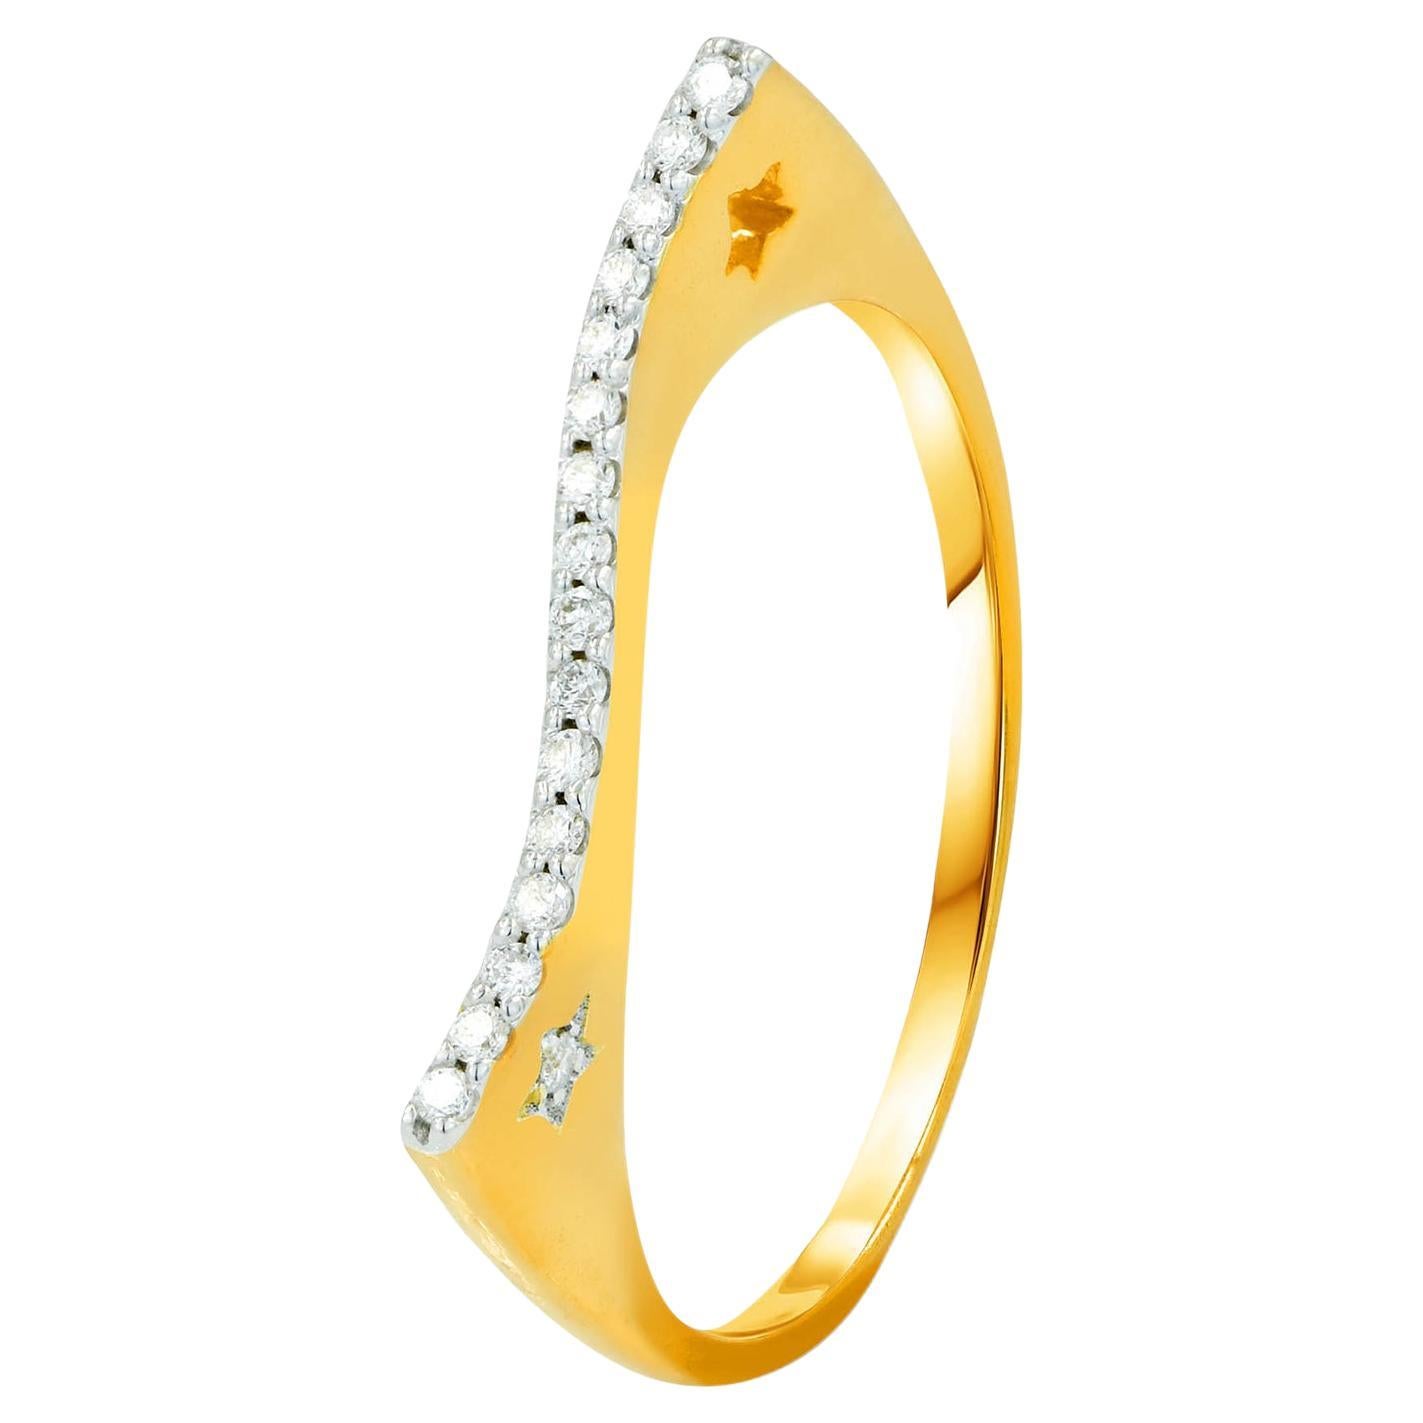 For Sale:  18k Gold Diamond Ring Curved Diamond Ring Thin Minimalist Statement Ring